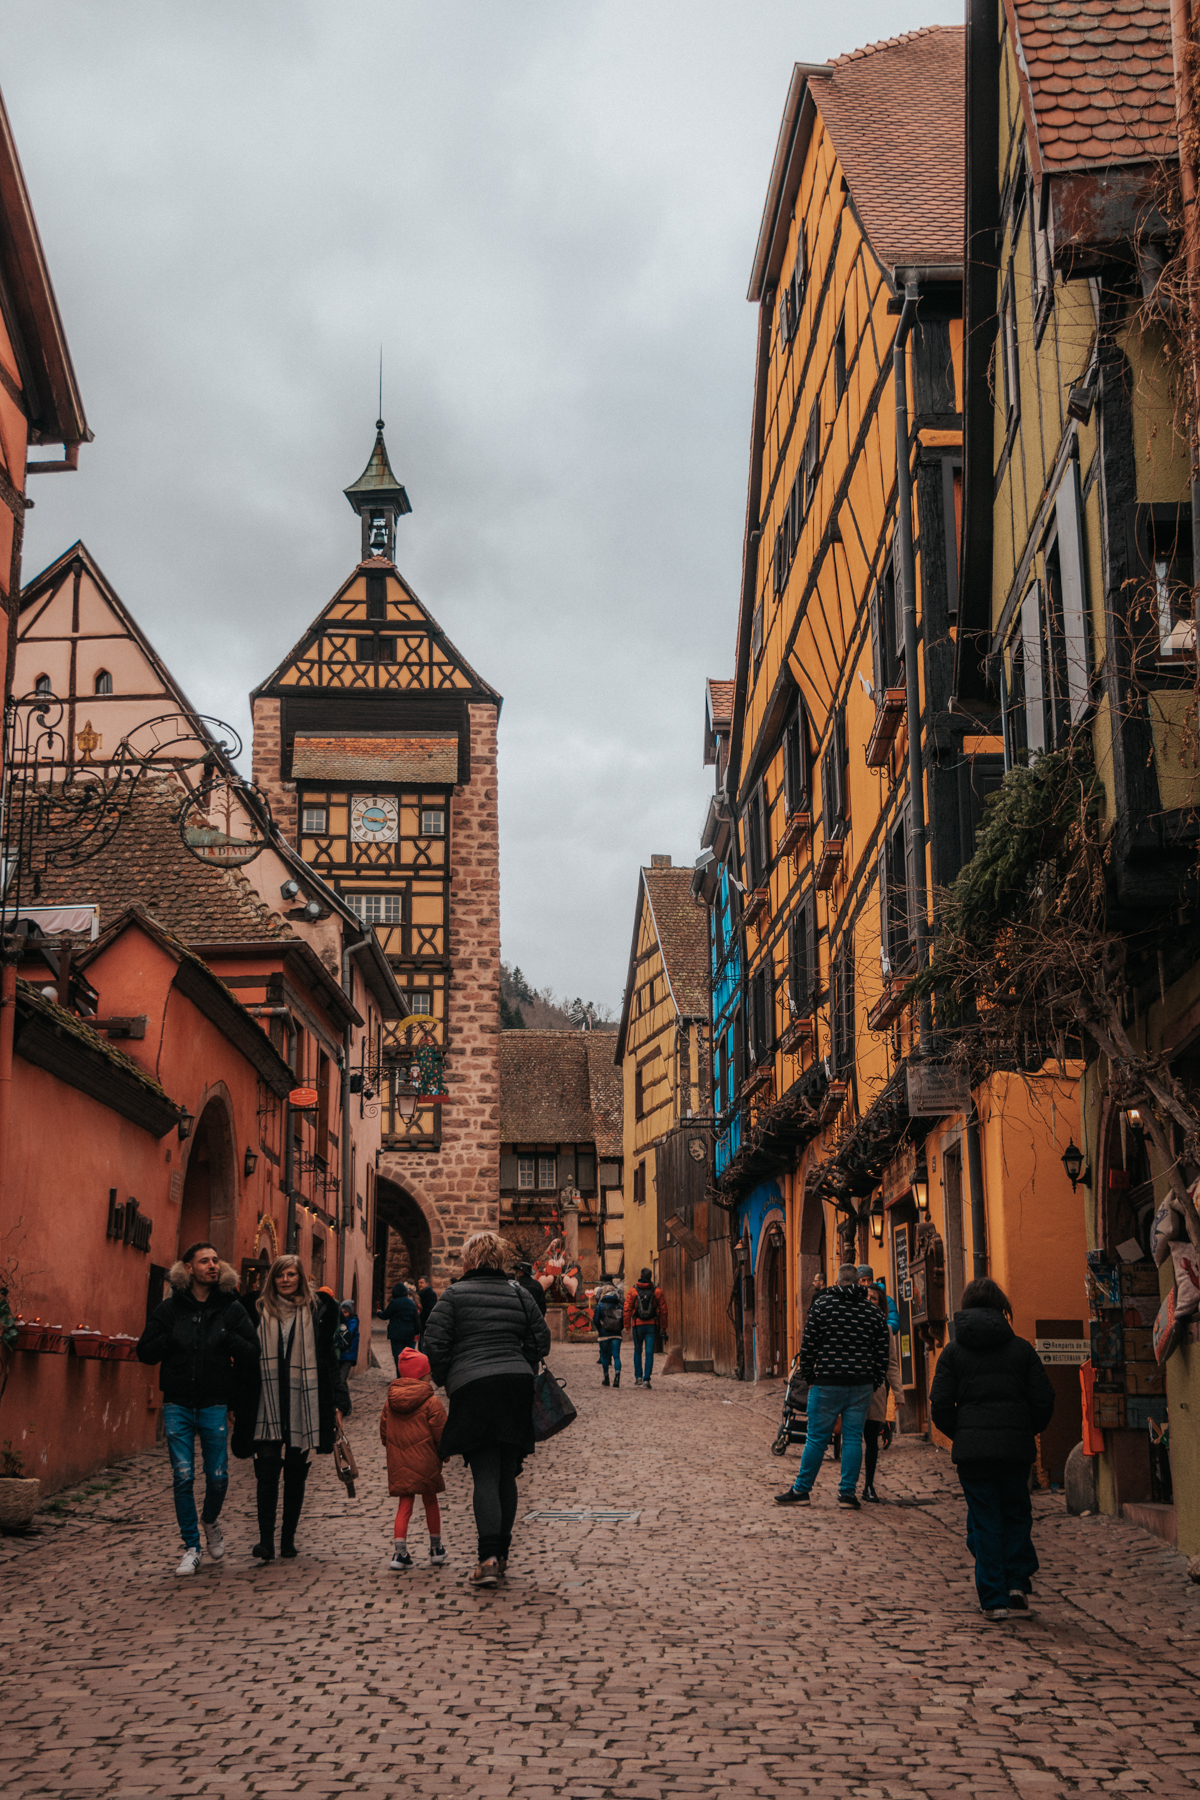 Riquewihr and Ribeauvillé, France: Discover the Villages that Inspired Disney’s Beauty and the Beast